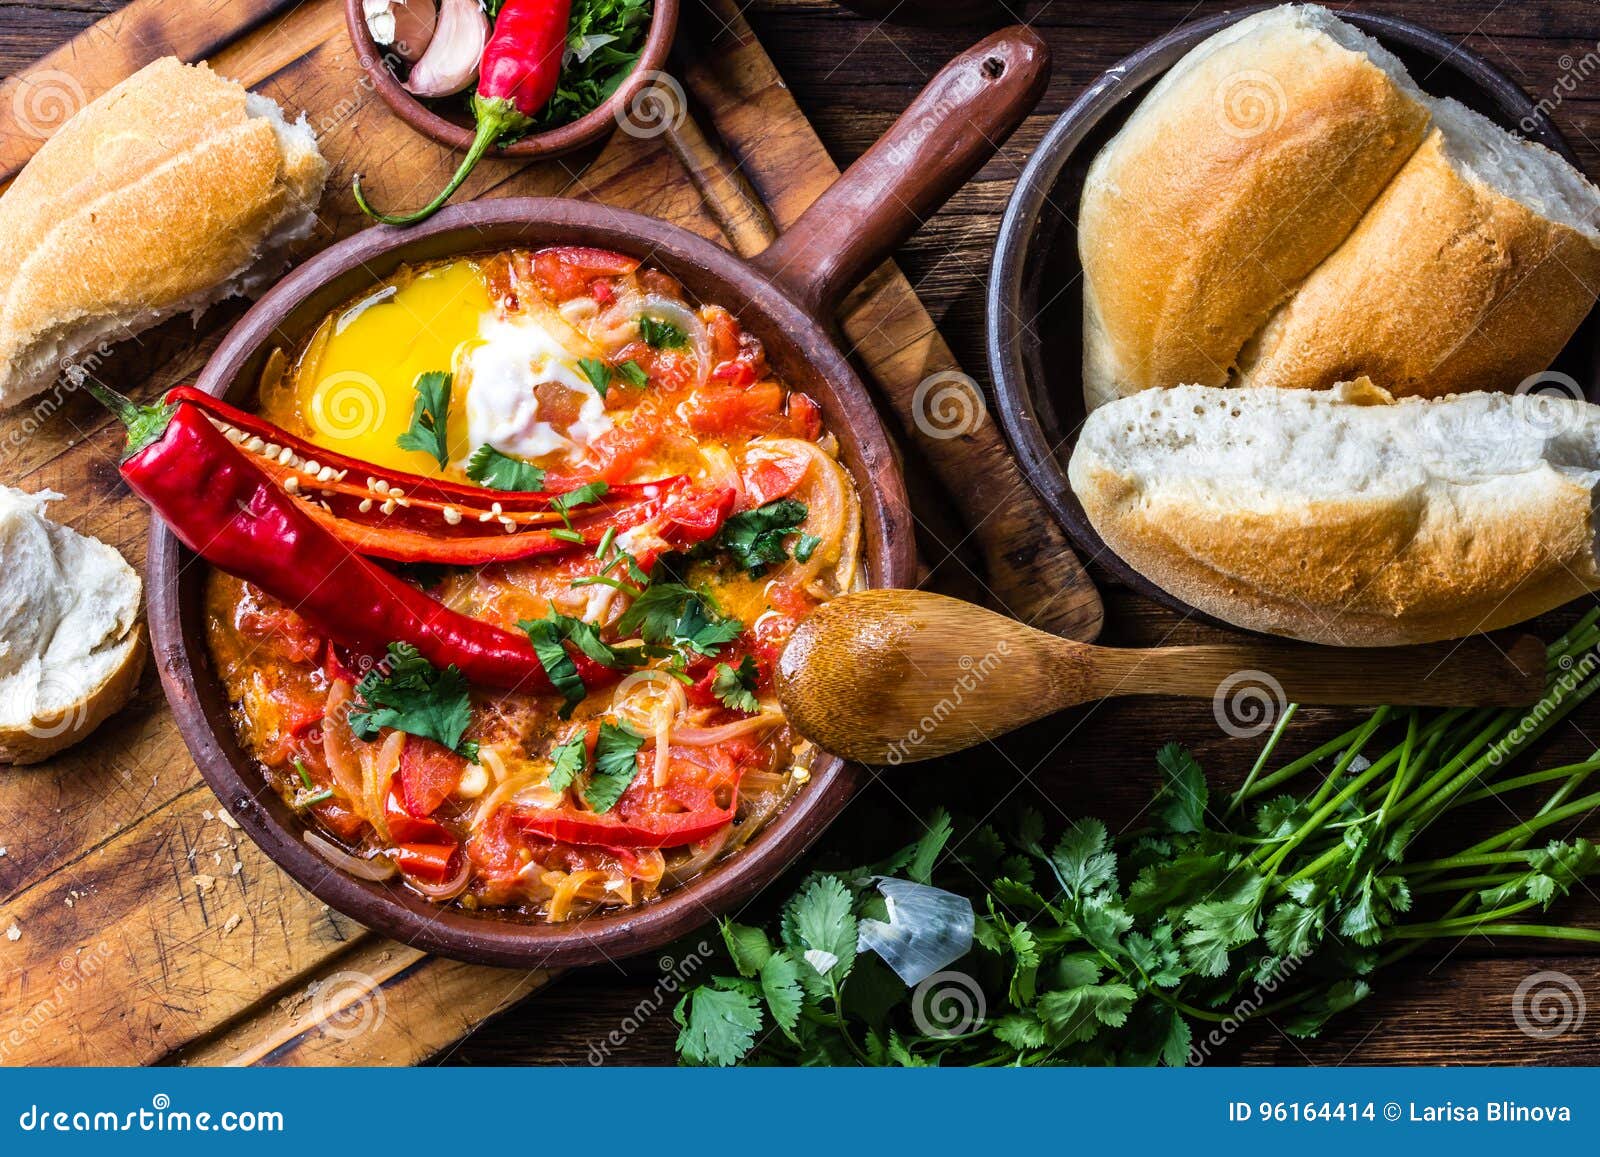 chilean food. picante caliente. tomatoes, onion, chili fried with eggs